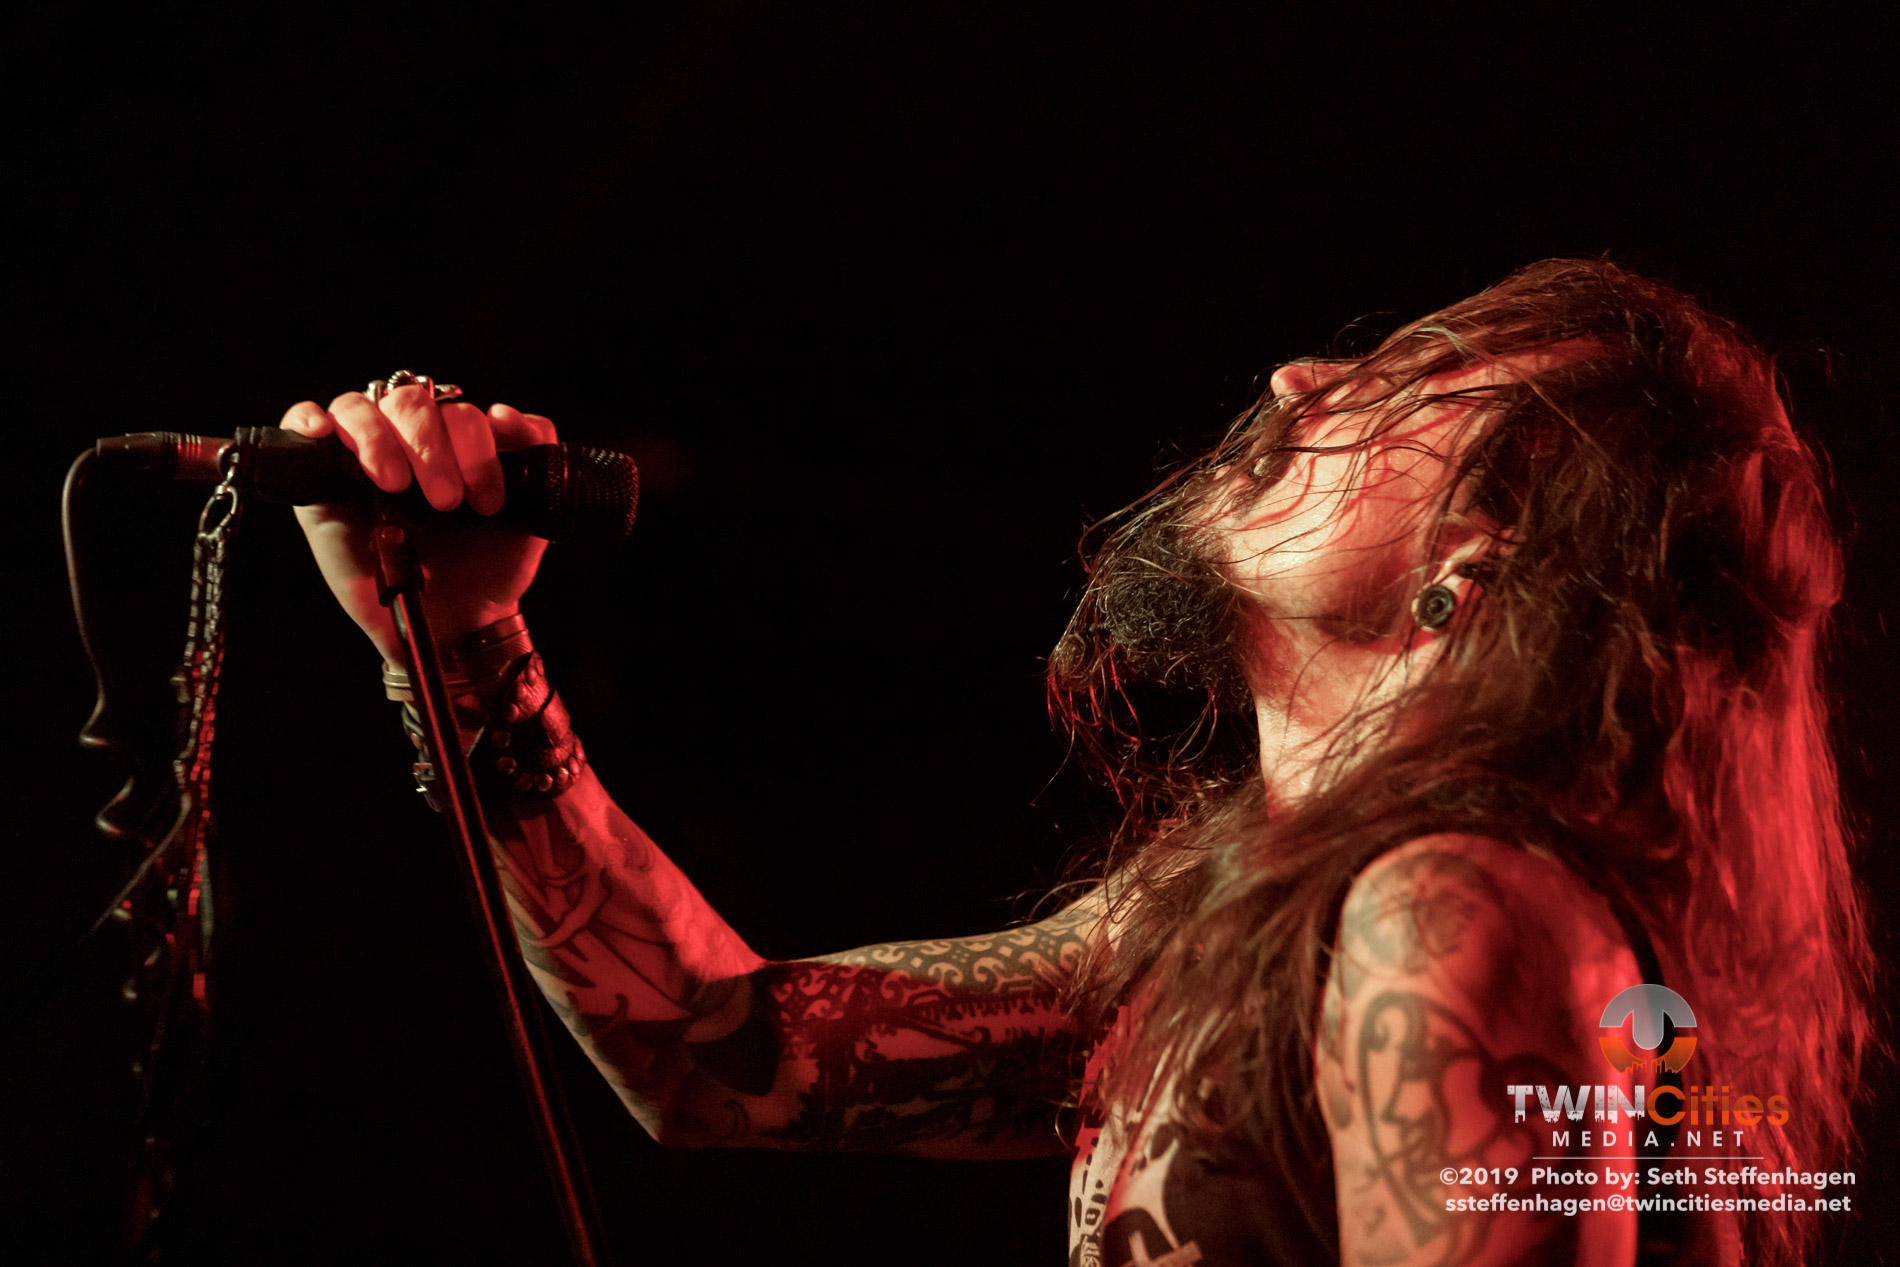 September 30, 2019 - Minneapolis, Minnesota, United States -  Amorphis live in concert at The Cabooze opening for Delain along with Anneke Van Giersbergen.

(Photo by Seth Steffenhagen/Steffenhagen Photography)